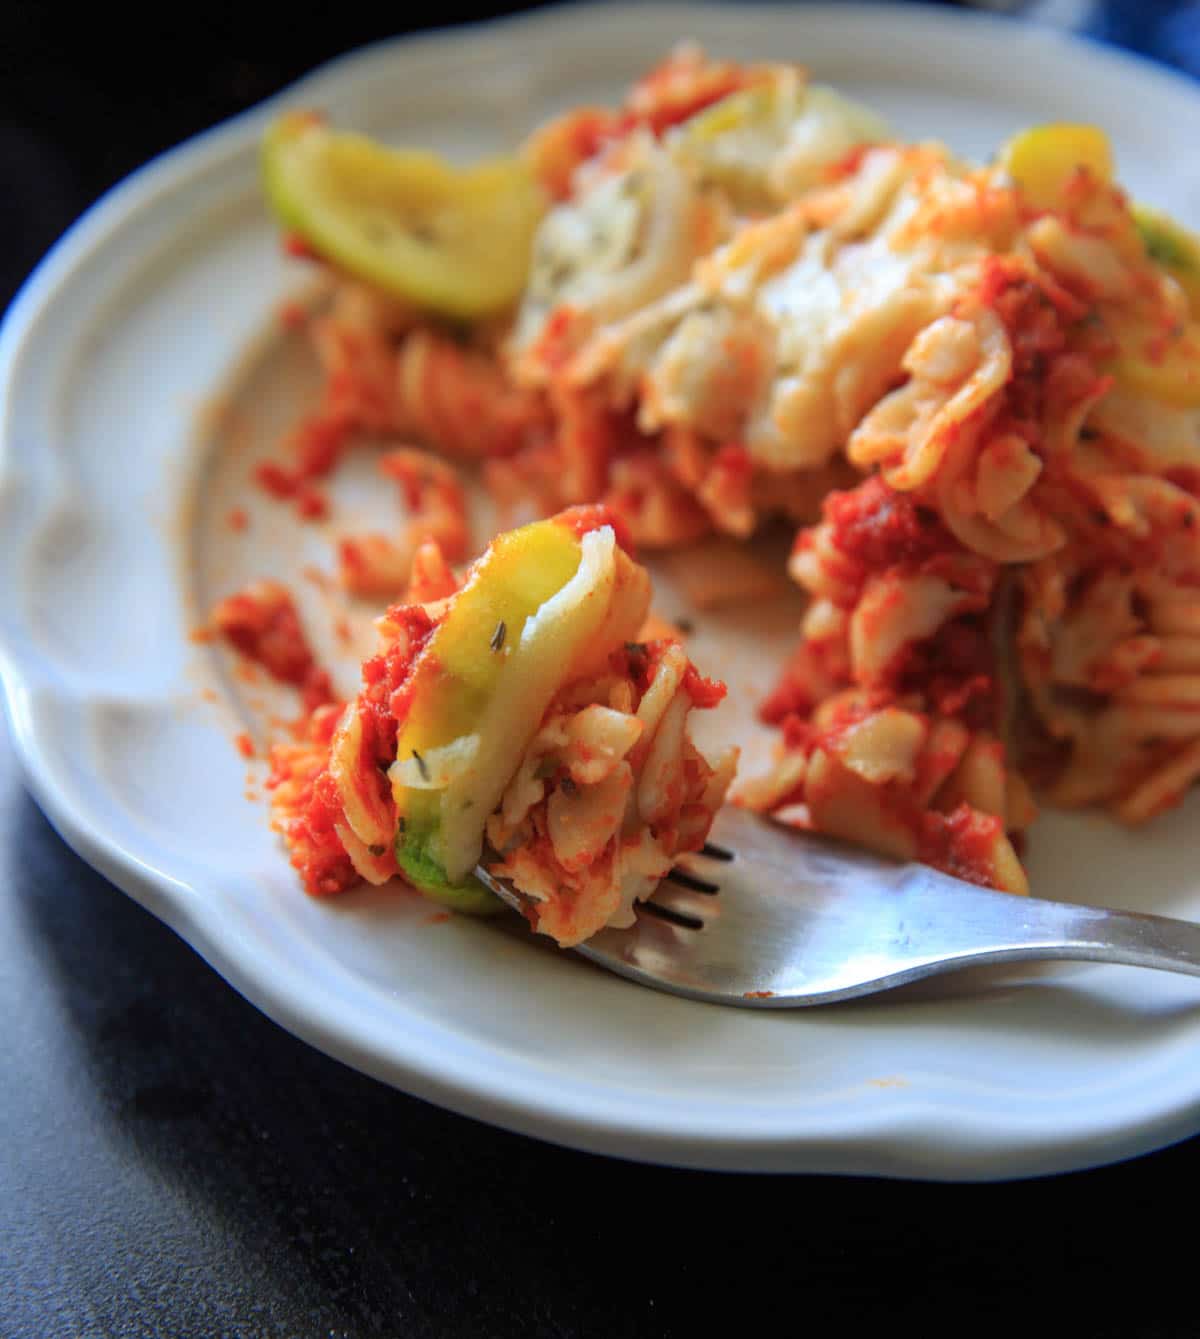 Zucchini Pasta Casserole with thyme. A super easy and healthy casserole that is healthy and easily gluten-free. With few ingredients (7 ingredients or less), dinner will be on the table in no time! Picture is single serving of pasta casserole with a fork bite.